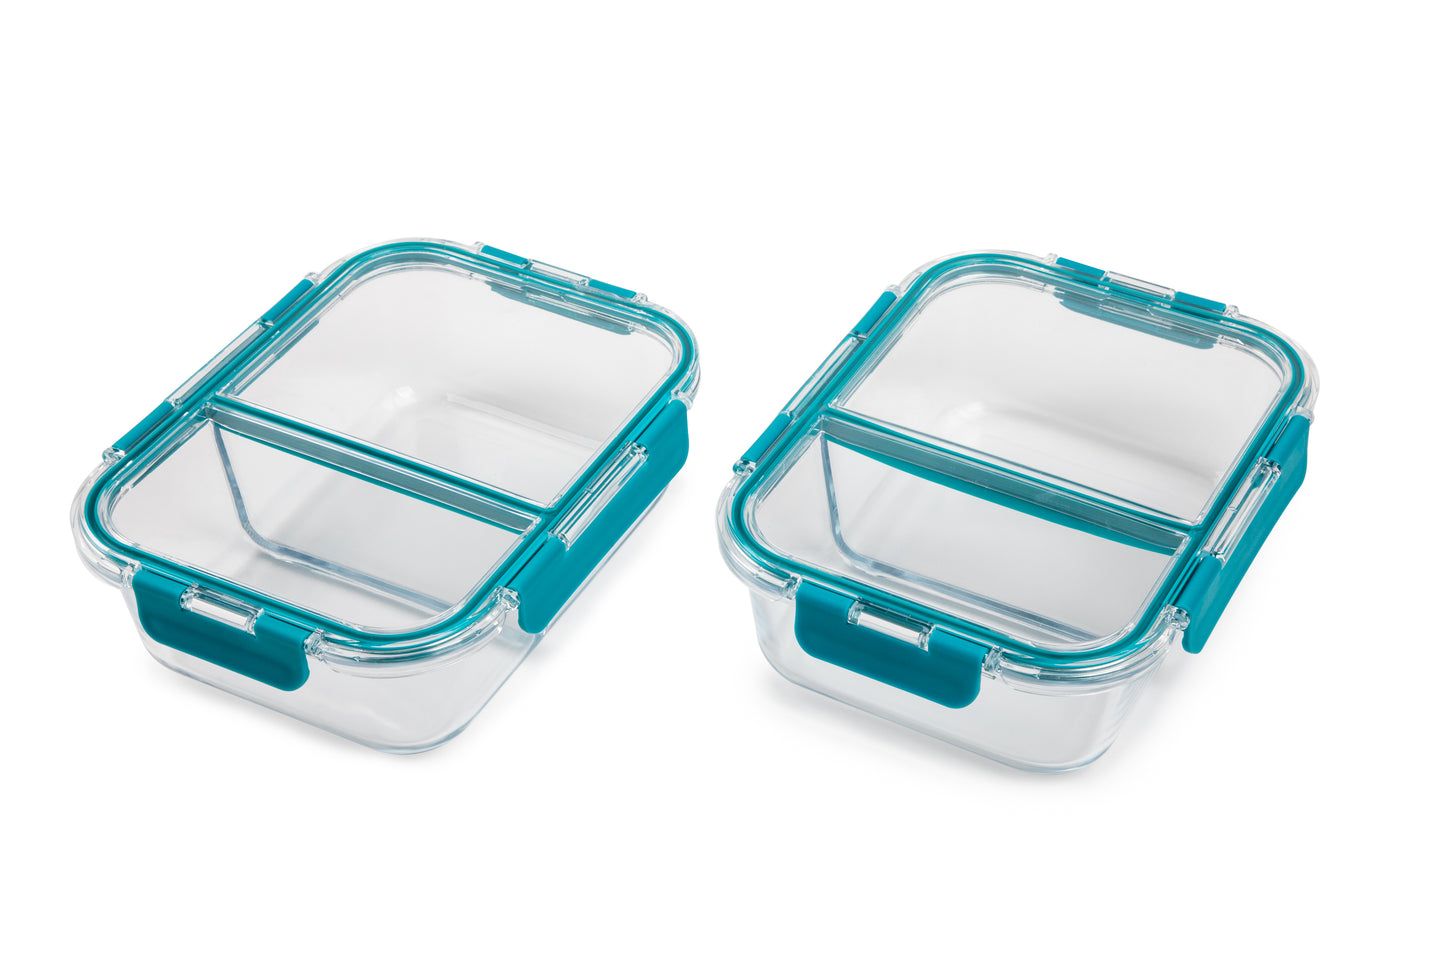 Teal glass and silicone food storage with a divider